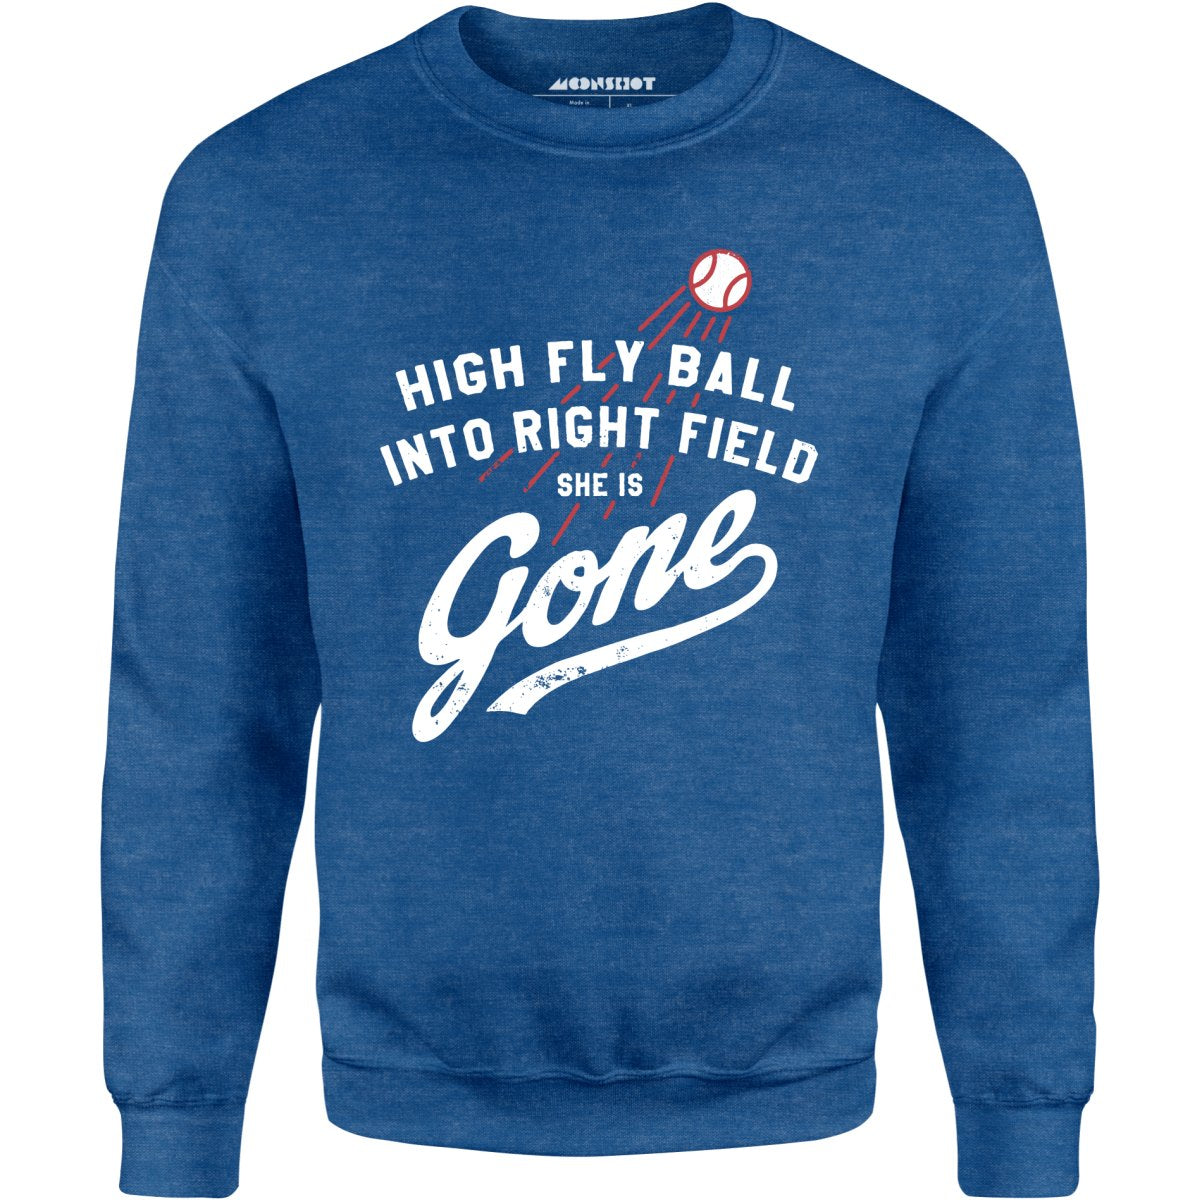 High Fly Ball Into Right Field She is Gone - Unisex Sweatshirt